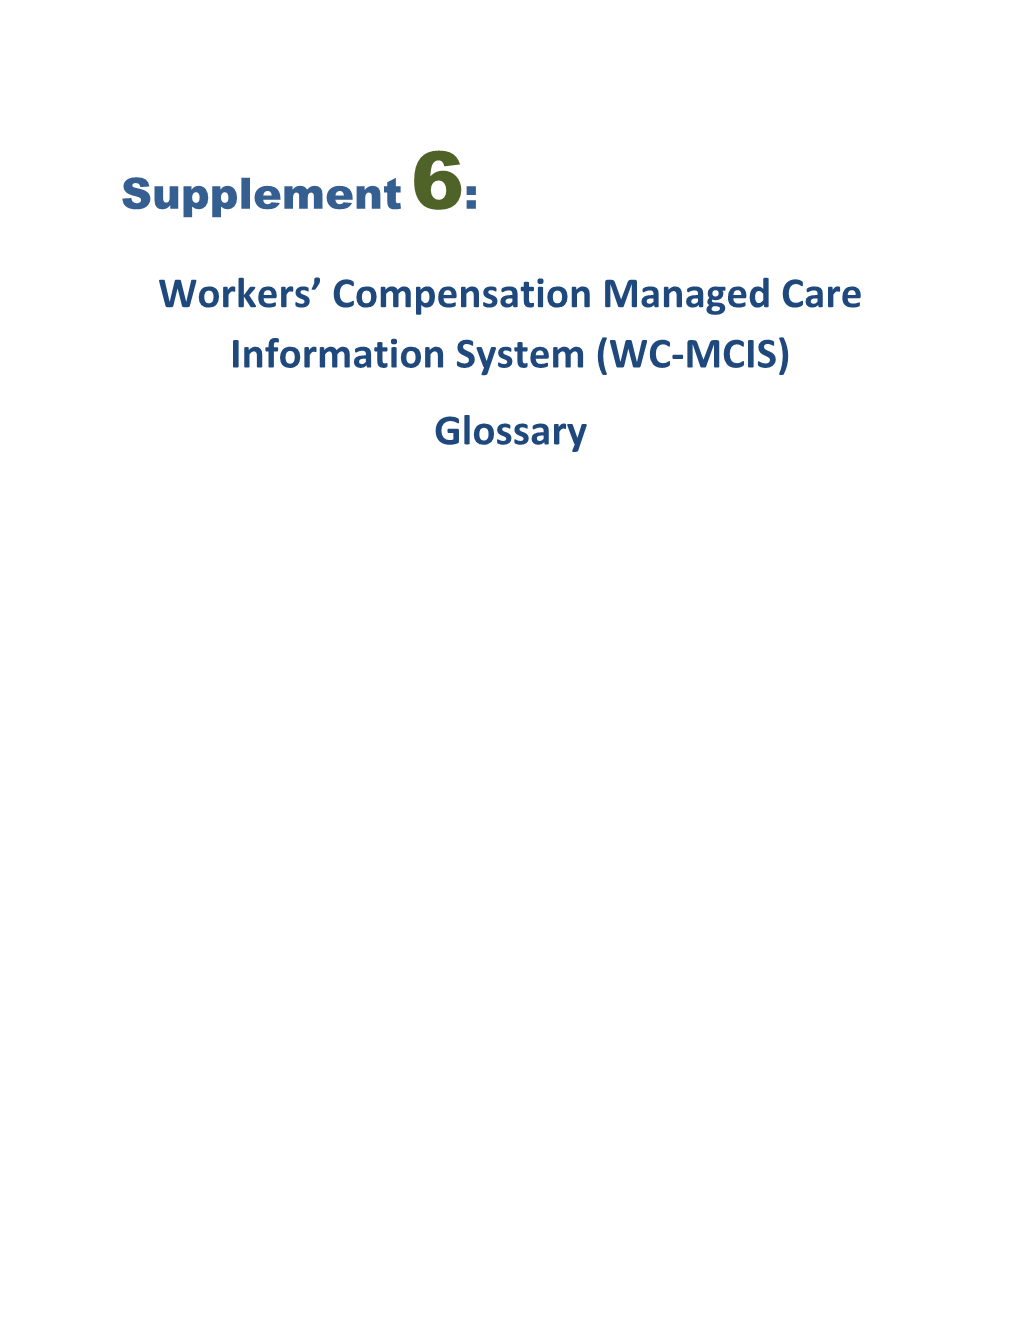 Workers Compensation Managed Care Information System (WC-MCIS)